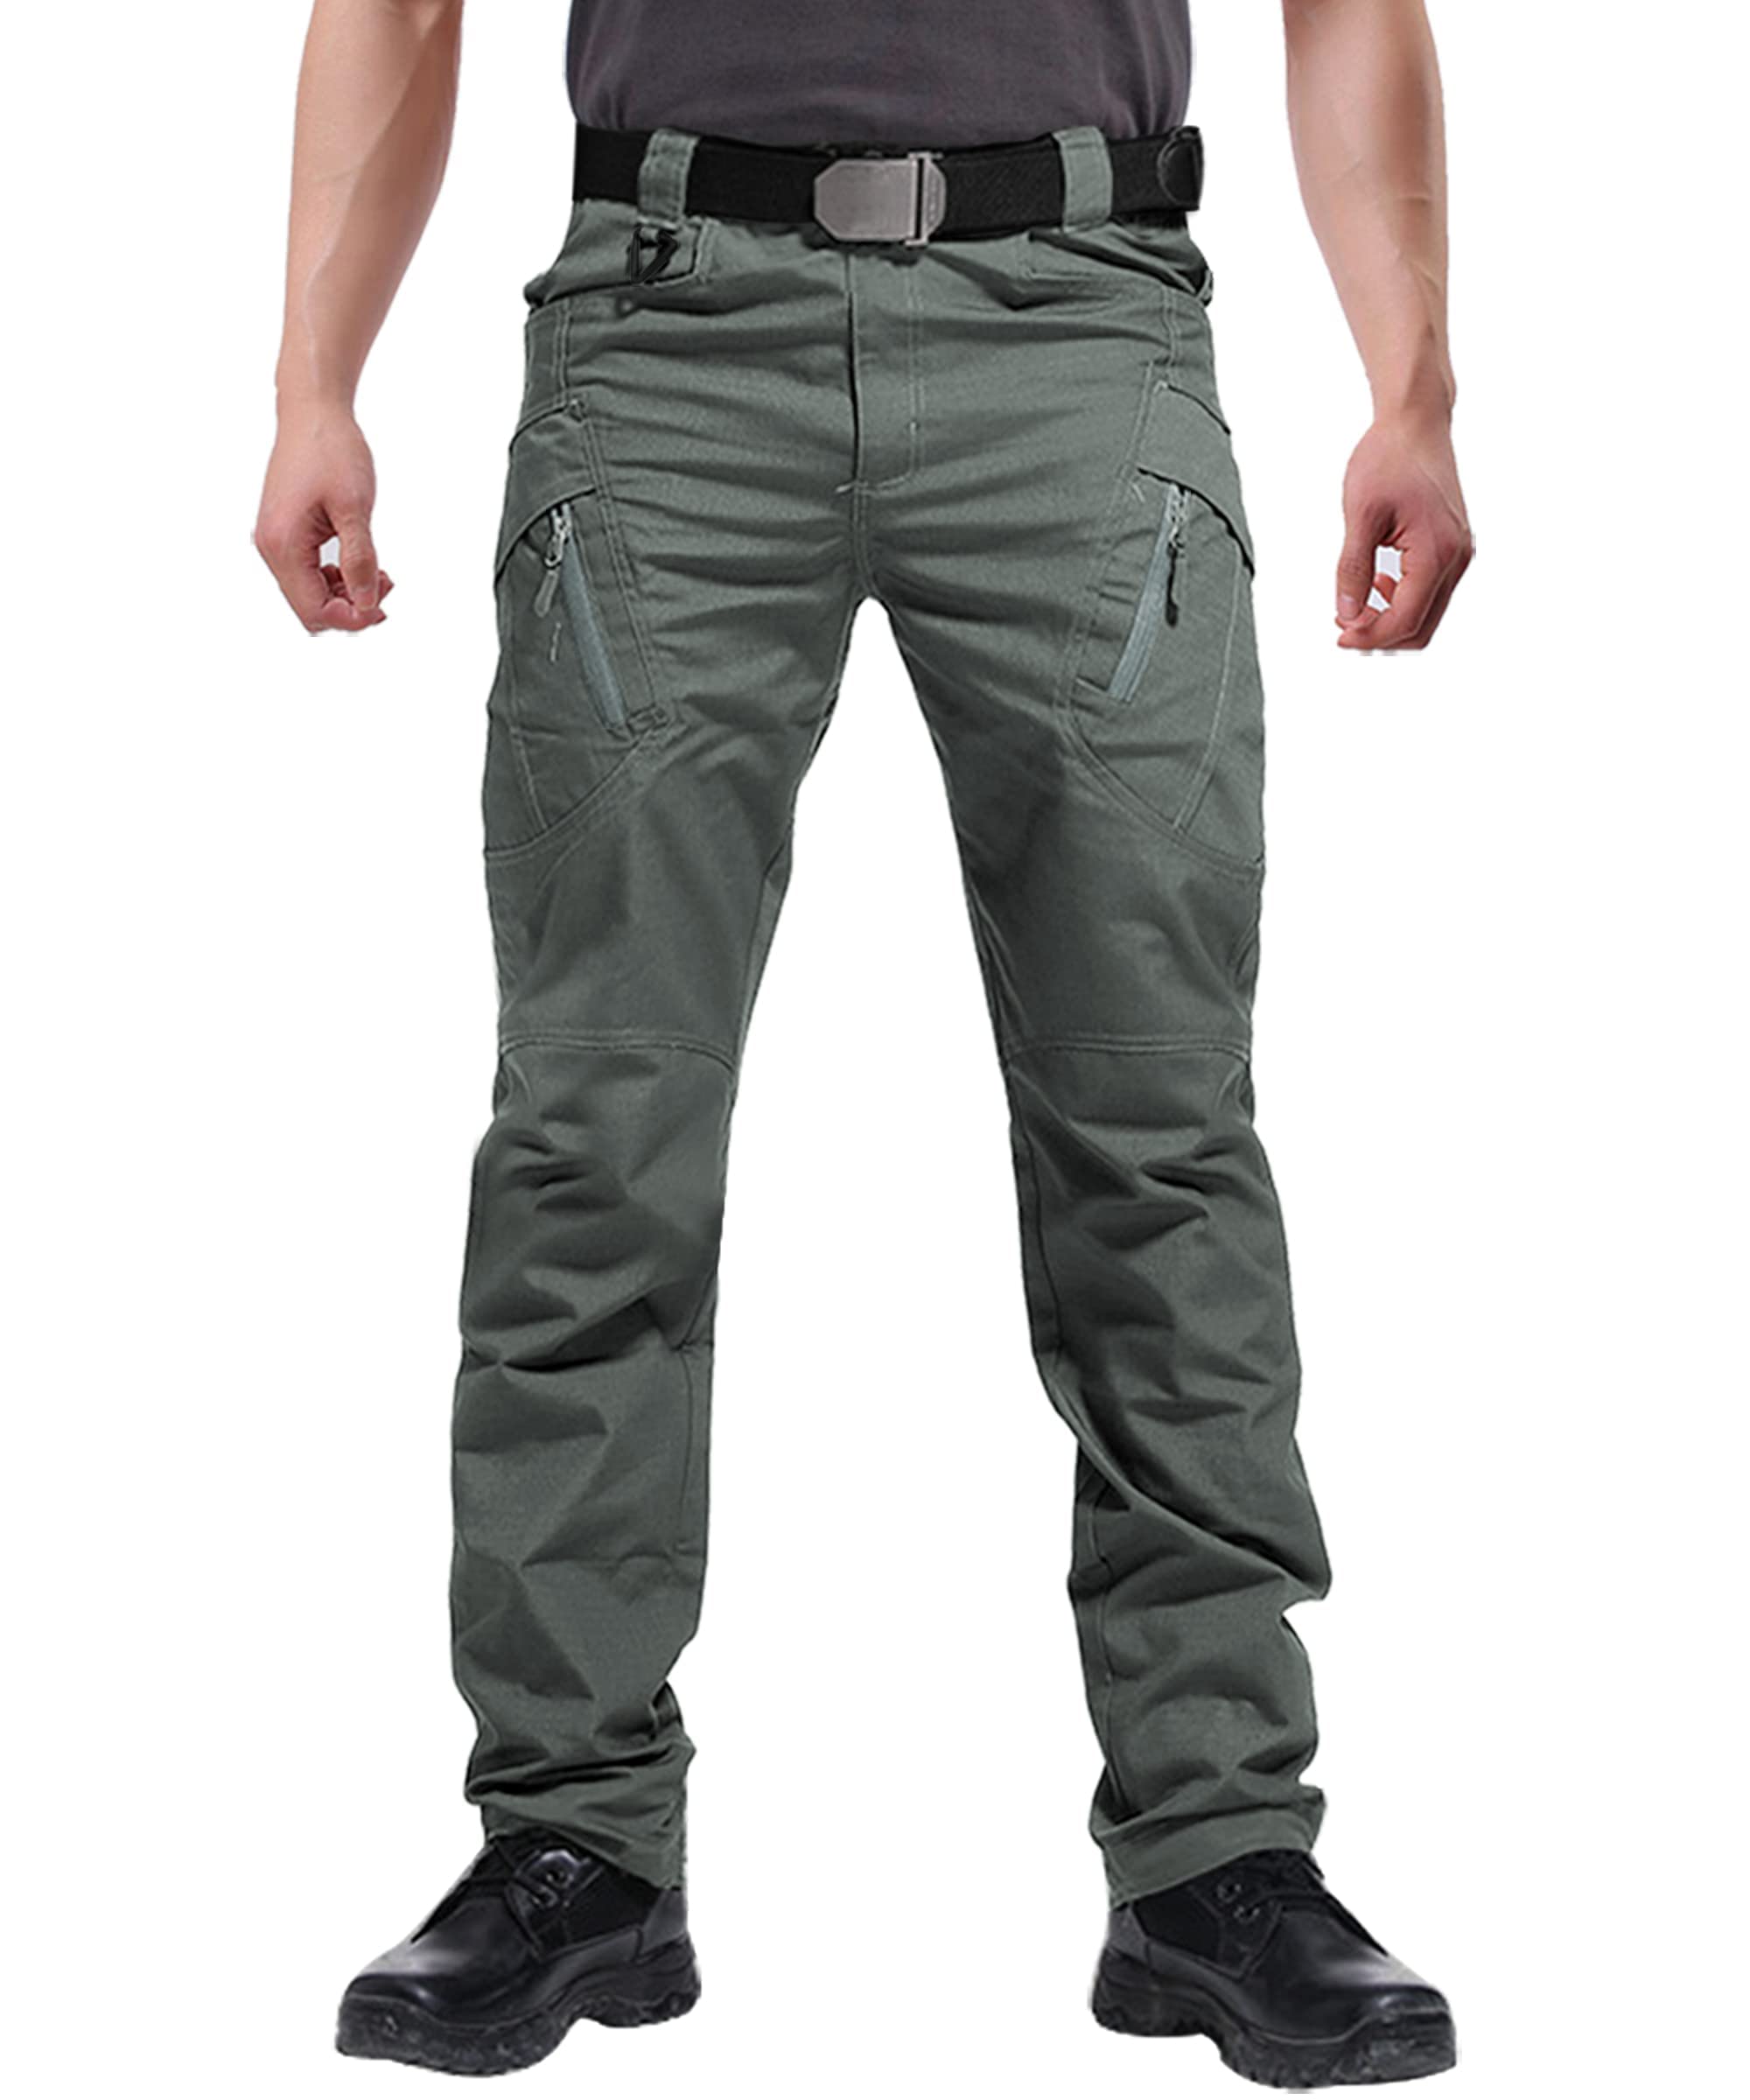 Susclude Mens Outdoor Cargo Workout Pants Military Tactical Pants Ripstop Assault Combat Army Pants Gray Green 36Wx30L